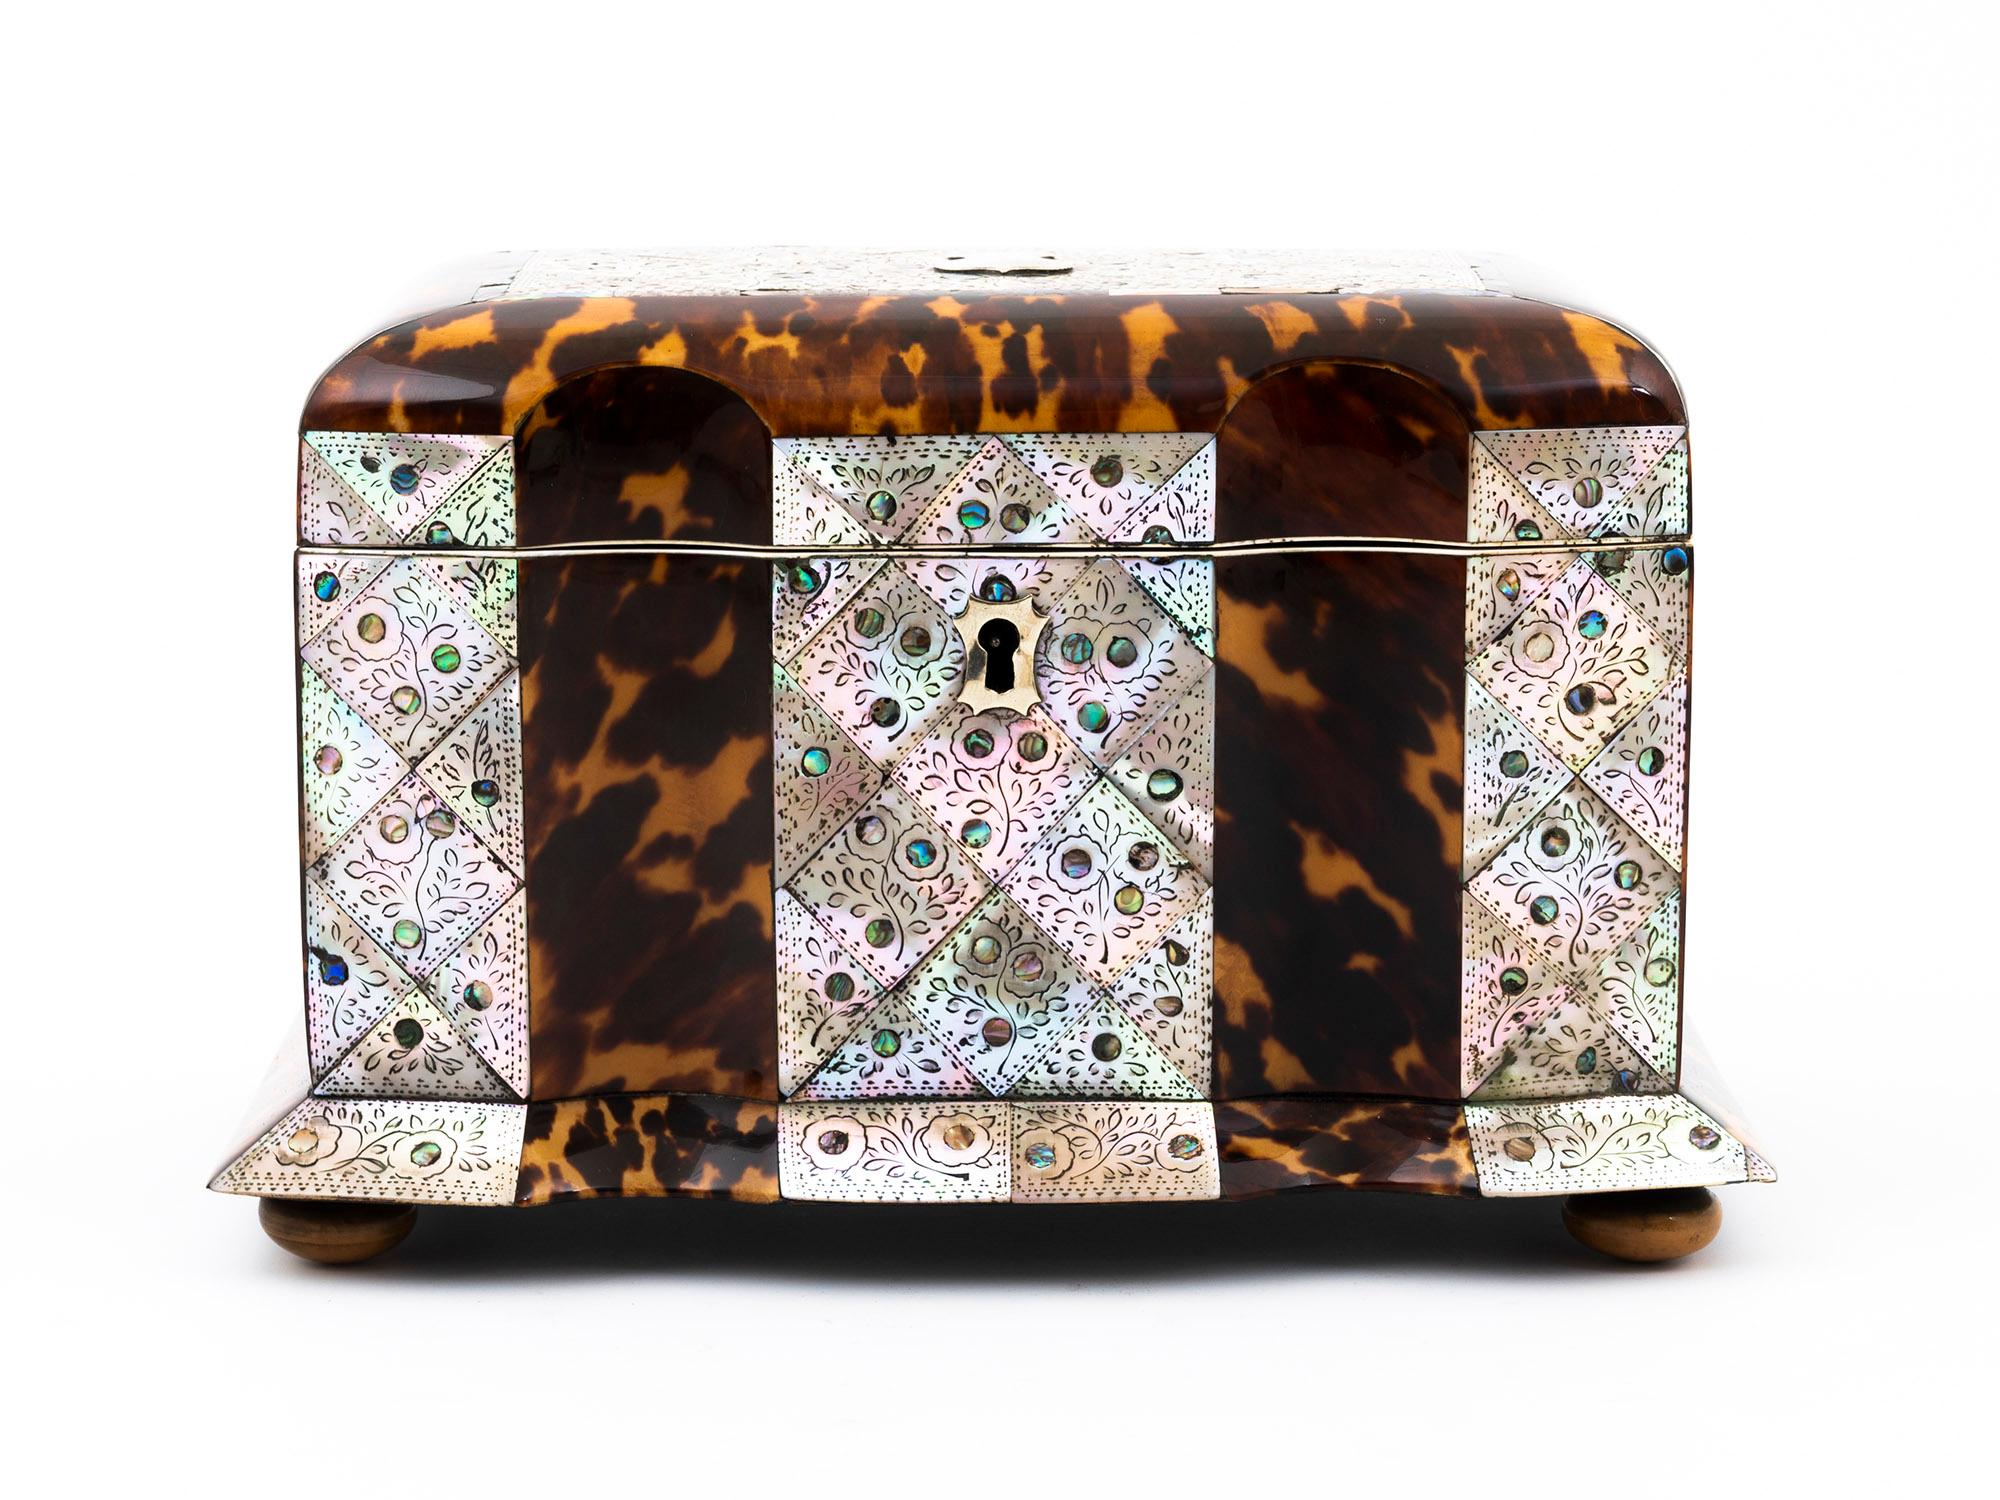 Featuring Alternating Panels

From our Tea Caddy collection, we are delighted to offer this fine Regency Tortoiseshell and Mother of Pearl Serpentine Tea Caddy. The Tea Caddy of rectangular shape veneered in both Tortoiseshell and Mother of Pearl